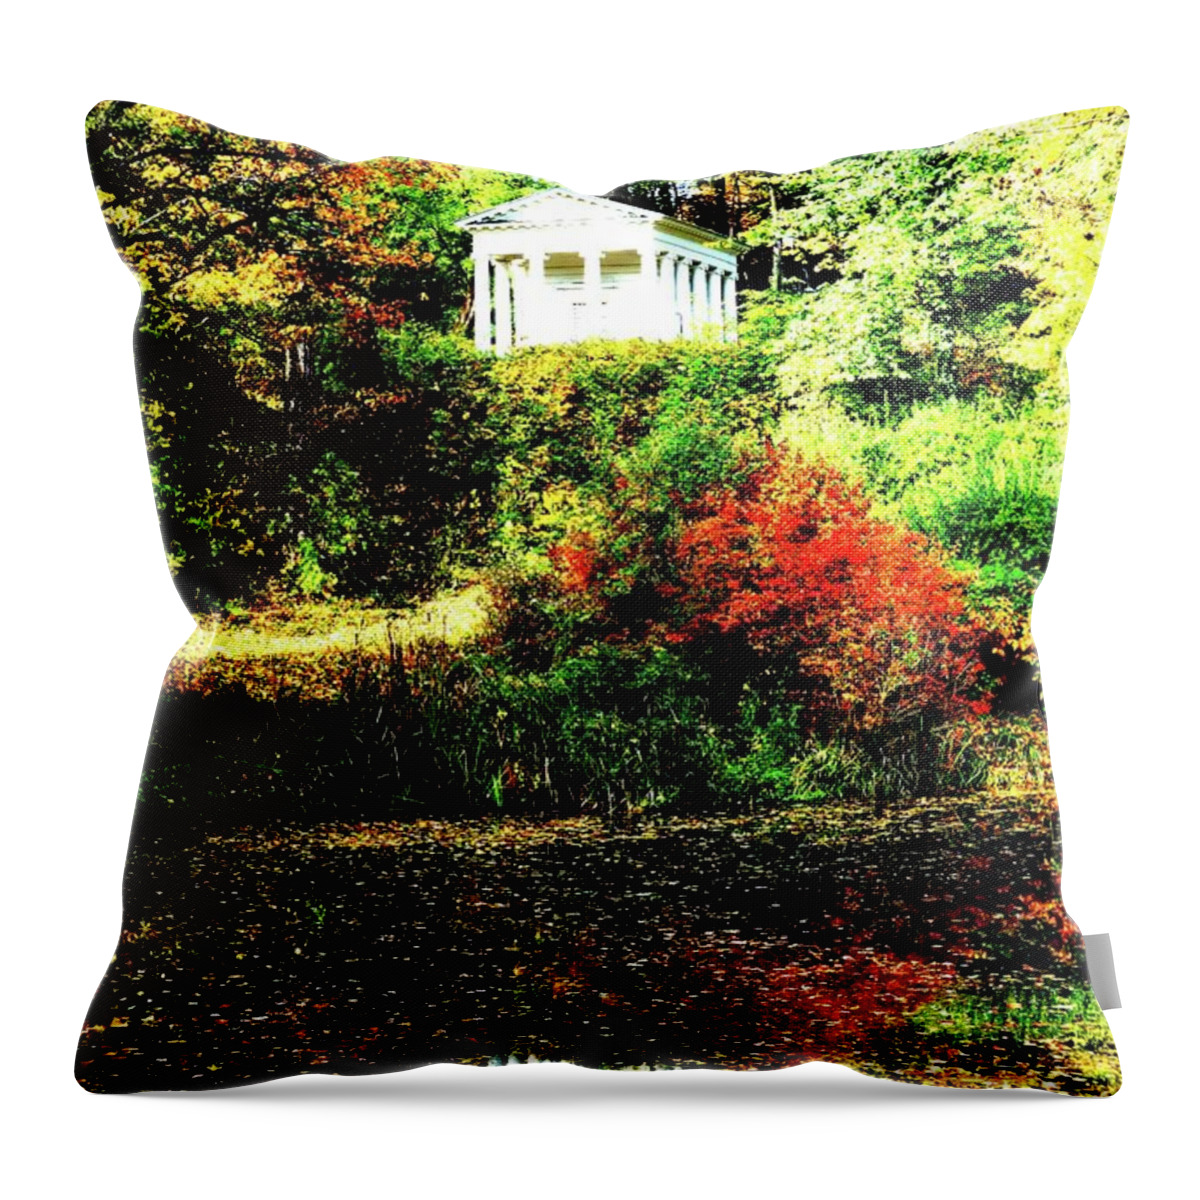 Lazienki Throw Pillow featuring the photograph Lazienki Park In Warsaw, Poland by John Siest